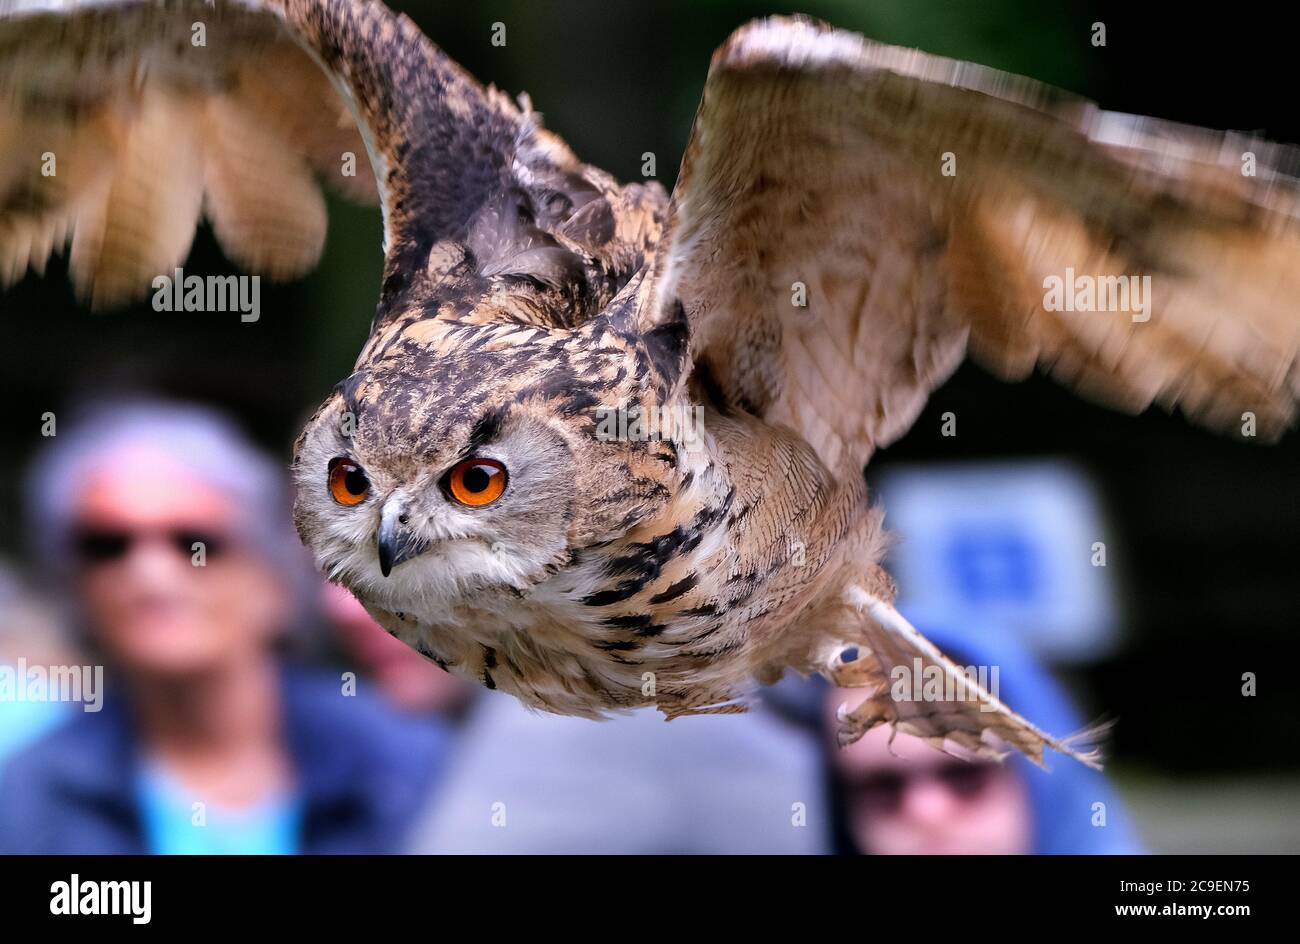 Eagle Owl on display at wildlife park in UK. Stock Photo